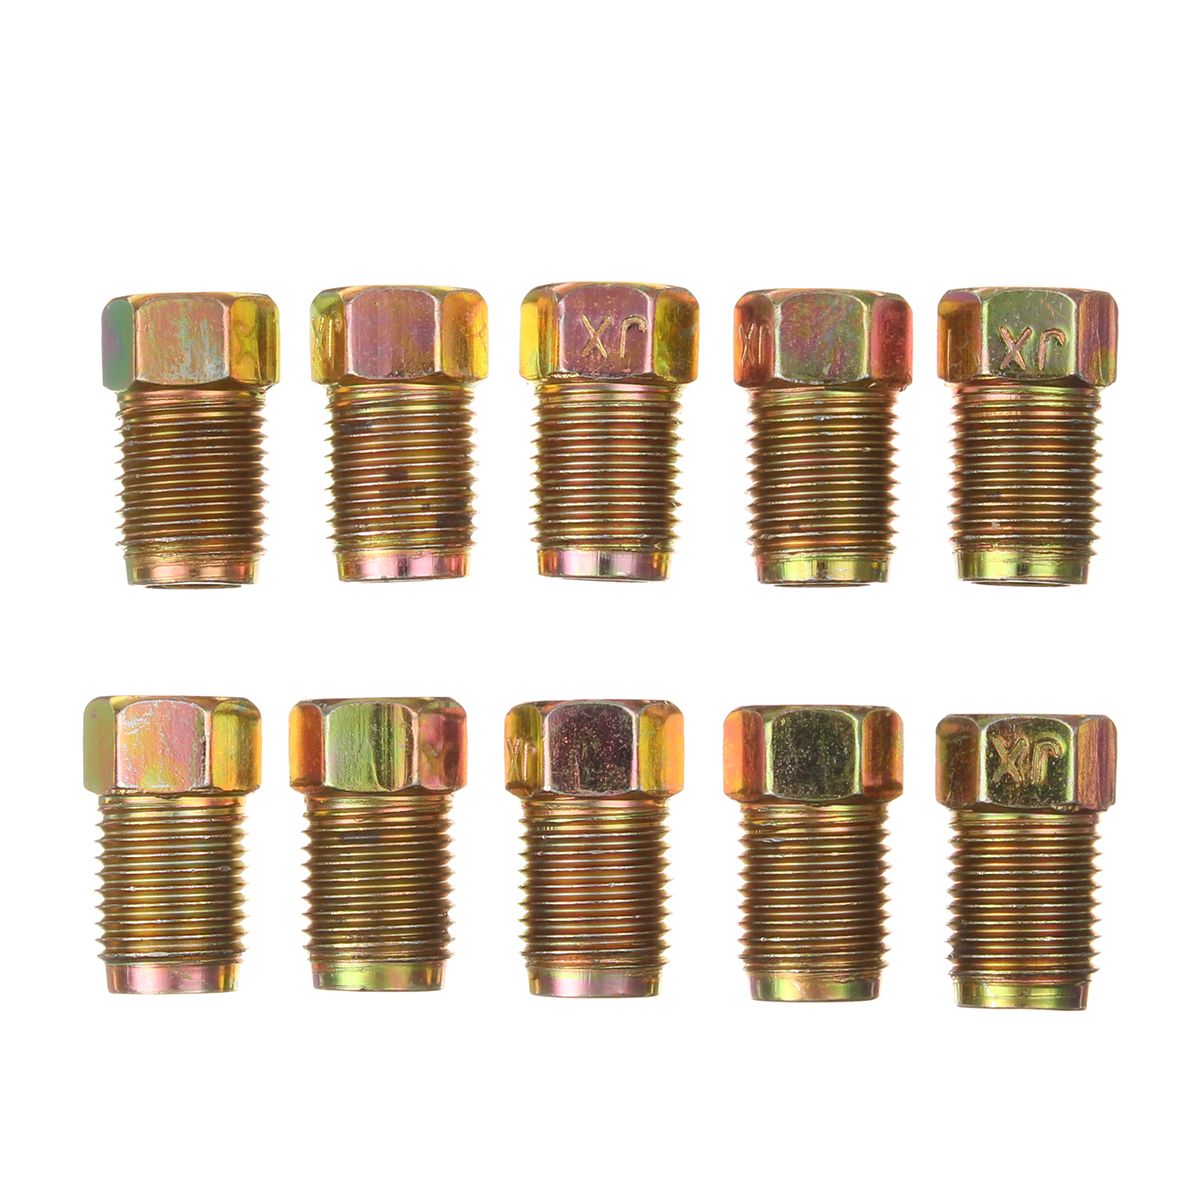 25ft-Copper-Brake-Line-Pipe-Hose-Kit-10-Male-amp-10-Female-Nuts-Joiner-Joint-316-Union-1543210